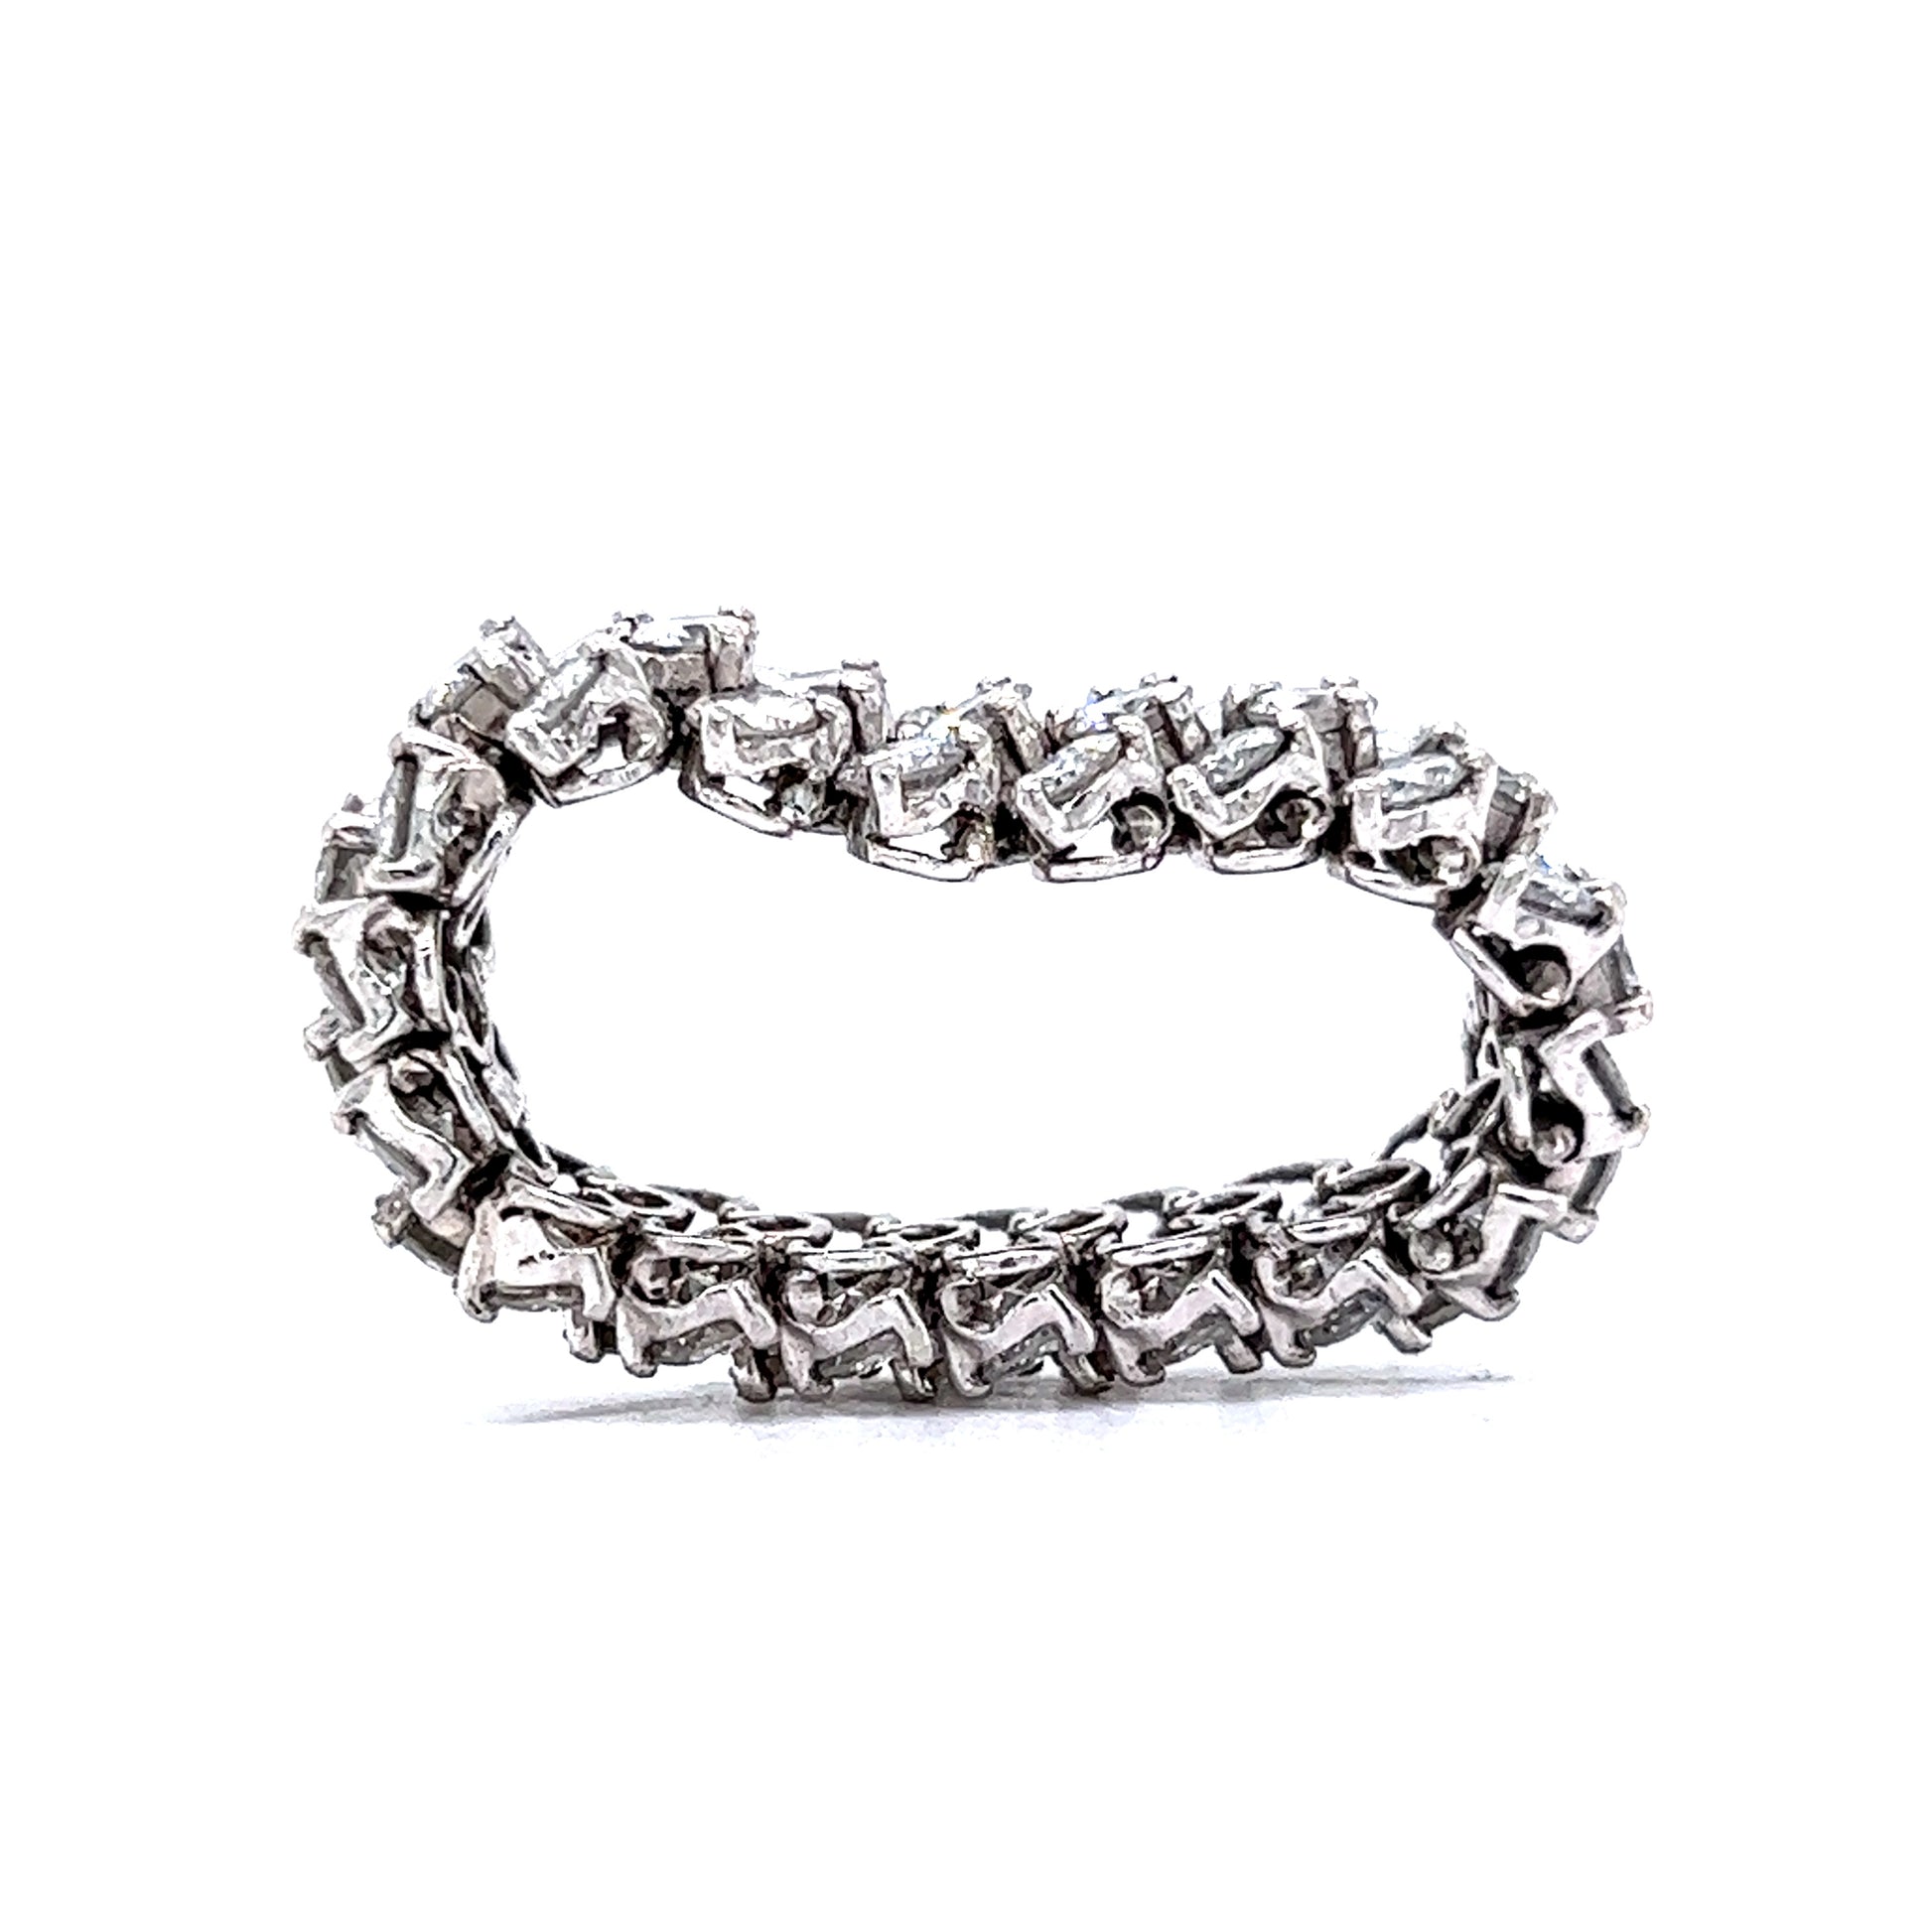 Flexible Diamond Eternity Band in PlatinumComposition: PlatinumRing Size: 7.5Total Diamond Weight: 5.60 ctTotal Gram Weight: 11.20 gInscription: 566